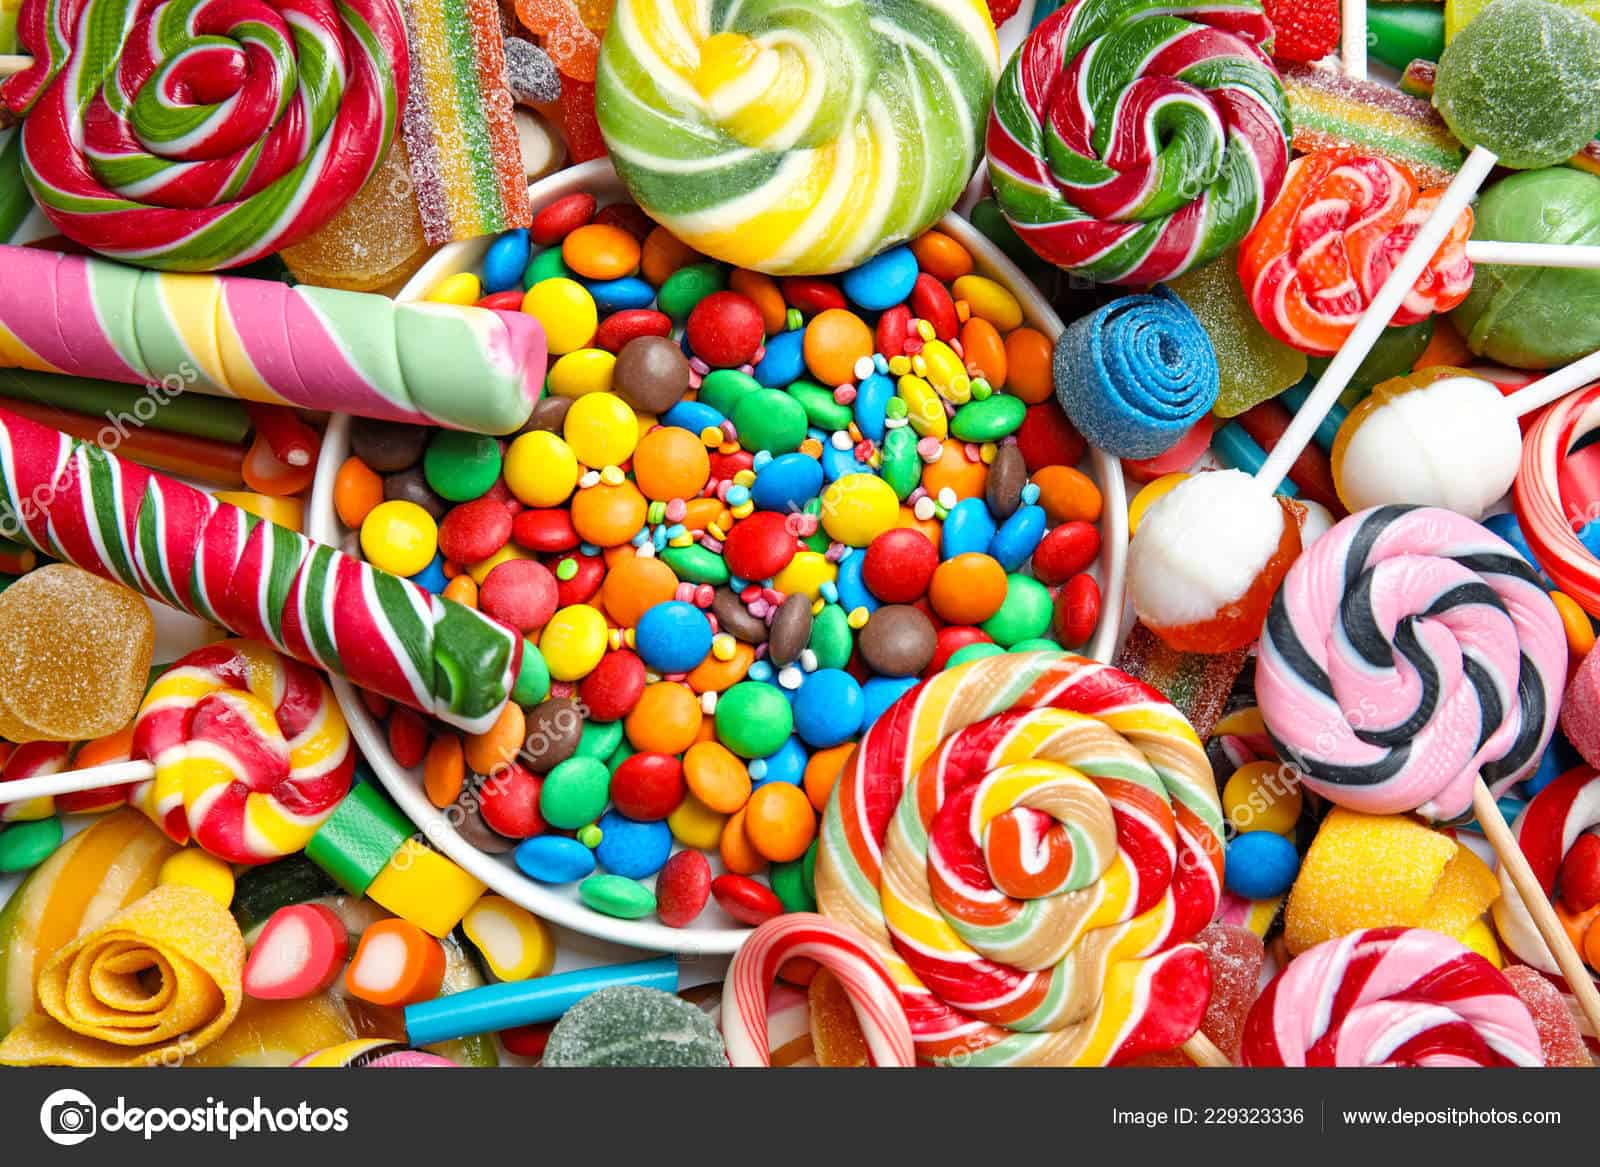 TrendMantra depositphotos_229323336-stock-photo-many-different-yummy-candies-background 10 Things Only A 90s Kid Would Remember 